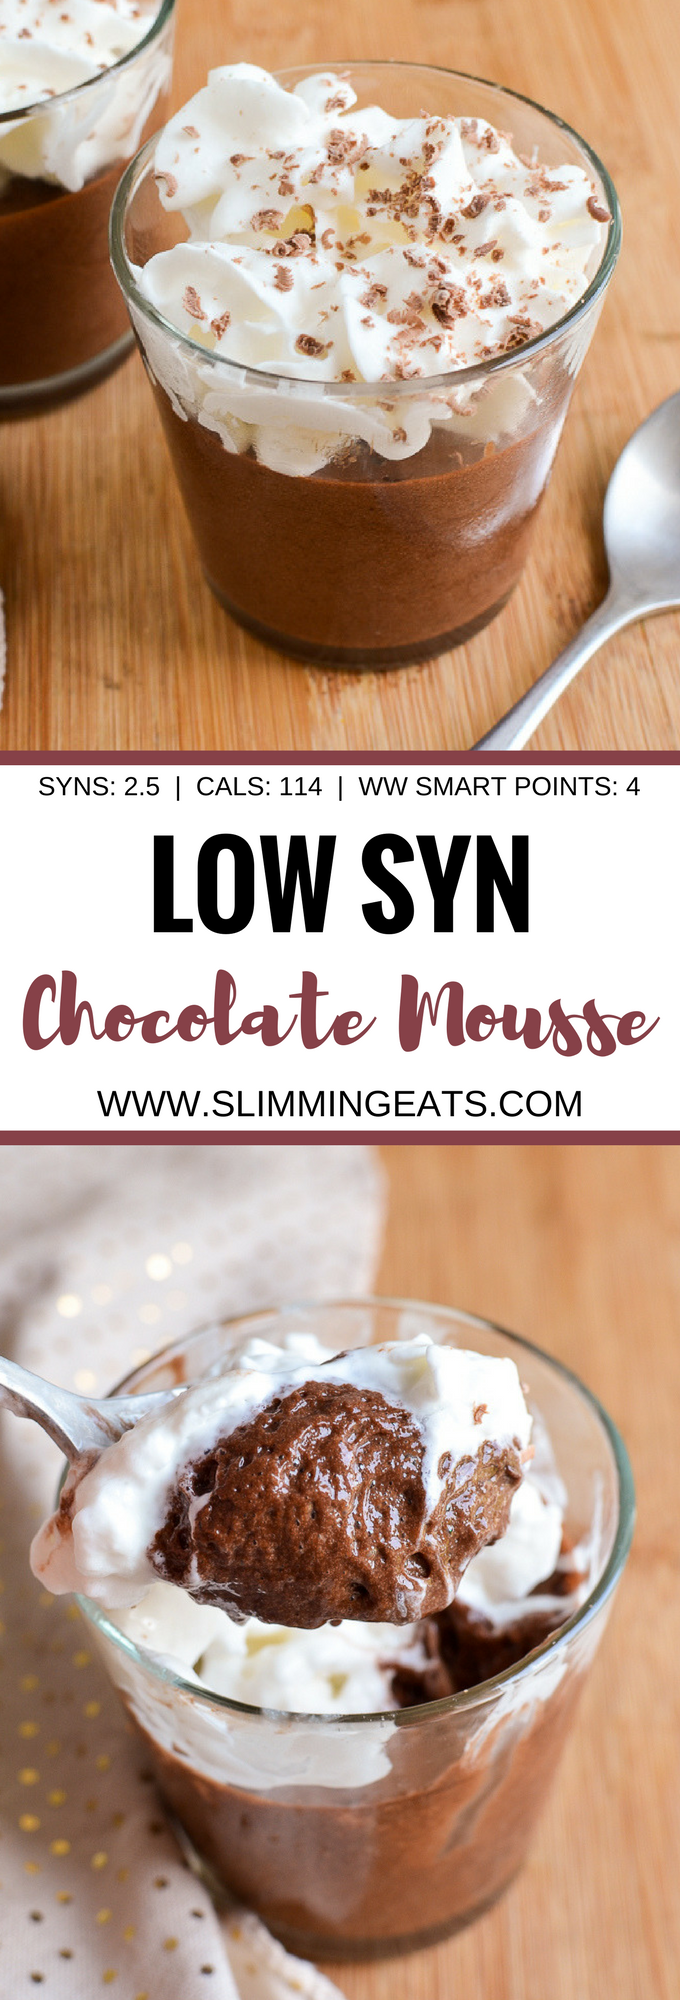 Slimming Eats Low Syn Chocolate Mousse - gluten free, dairy free, vegetarian, Slimming World and Weight Watchers friendly